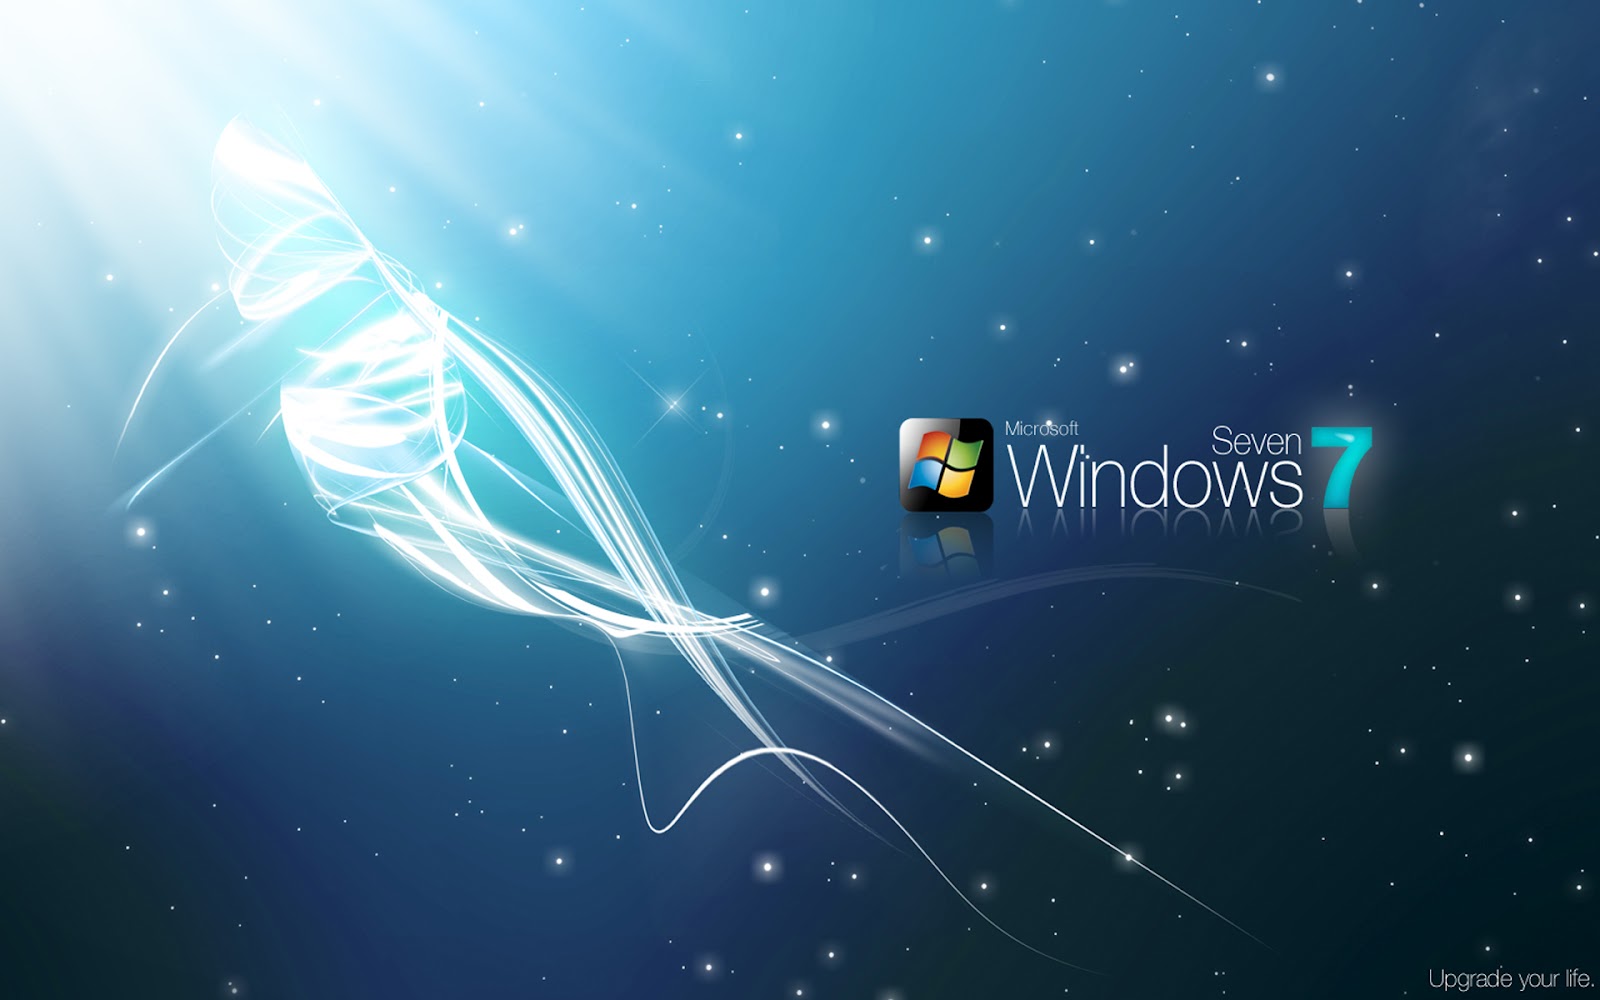 HD Wallpaper Of Windows Ultimate Unique Things